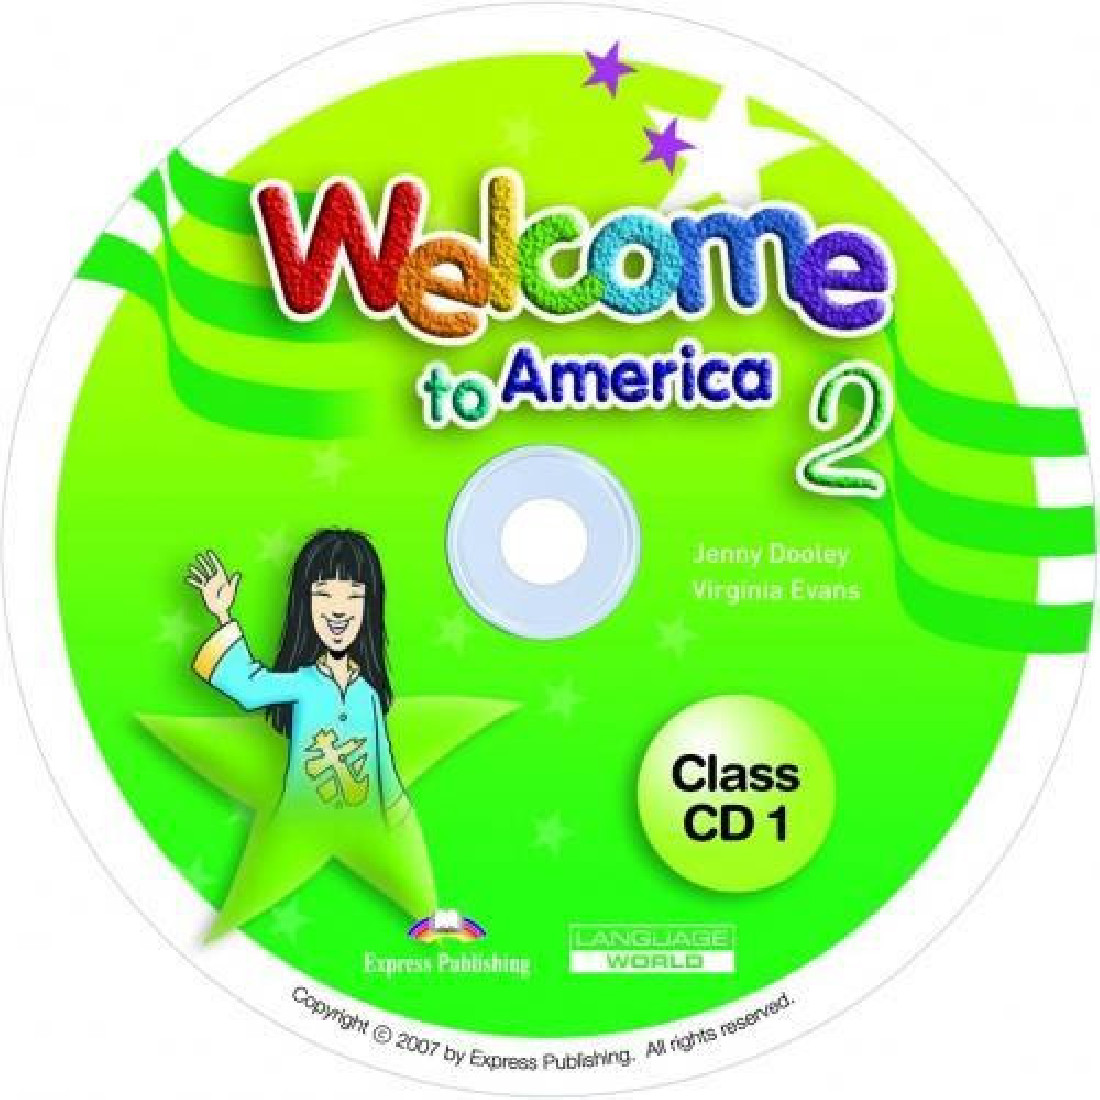 WELCOME TO AMERICA 2 CDs